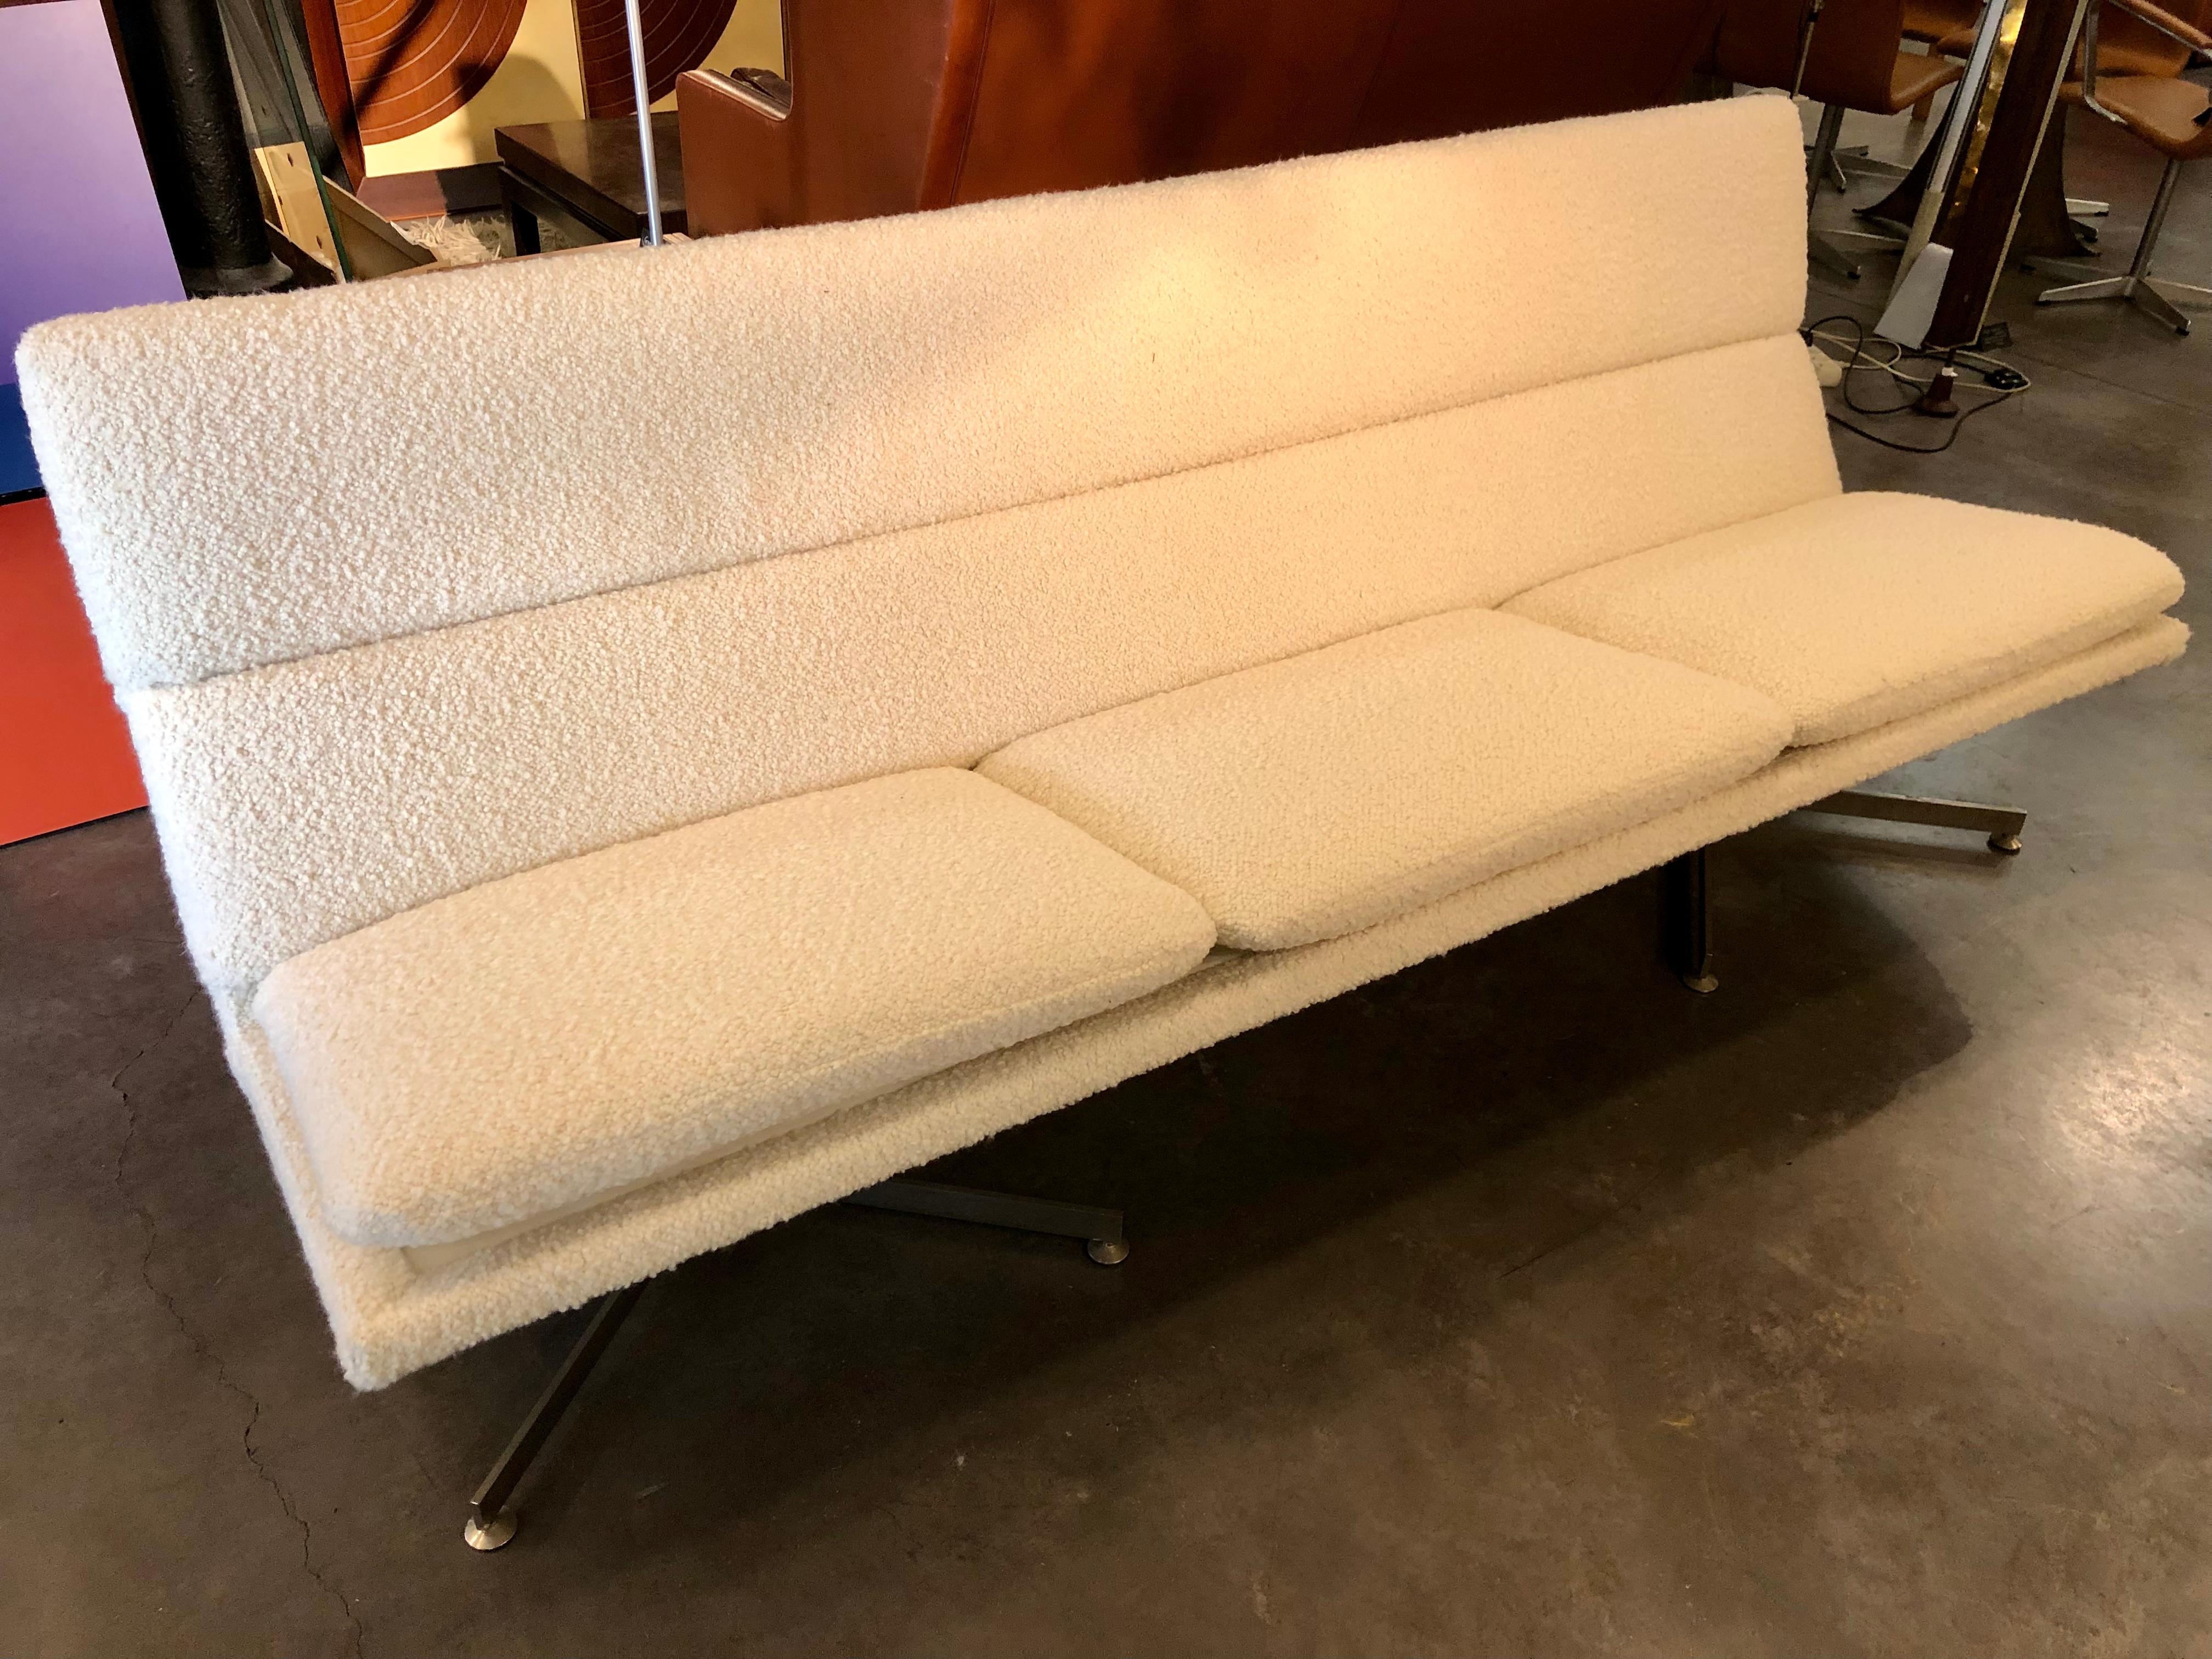 Belgian Big Linear Sofa from the Sixties by George van Rijck for Beaufort